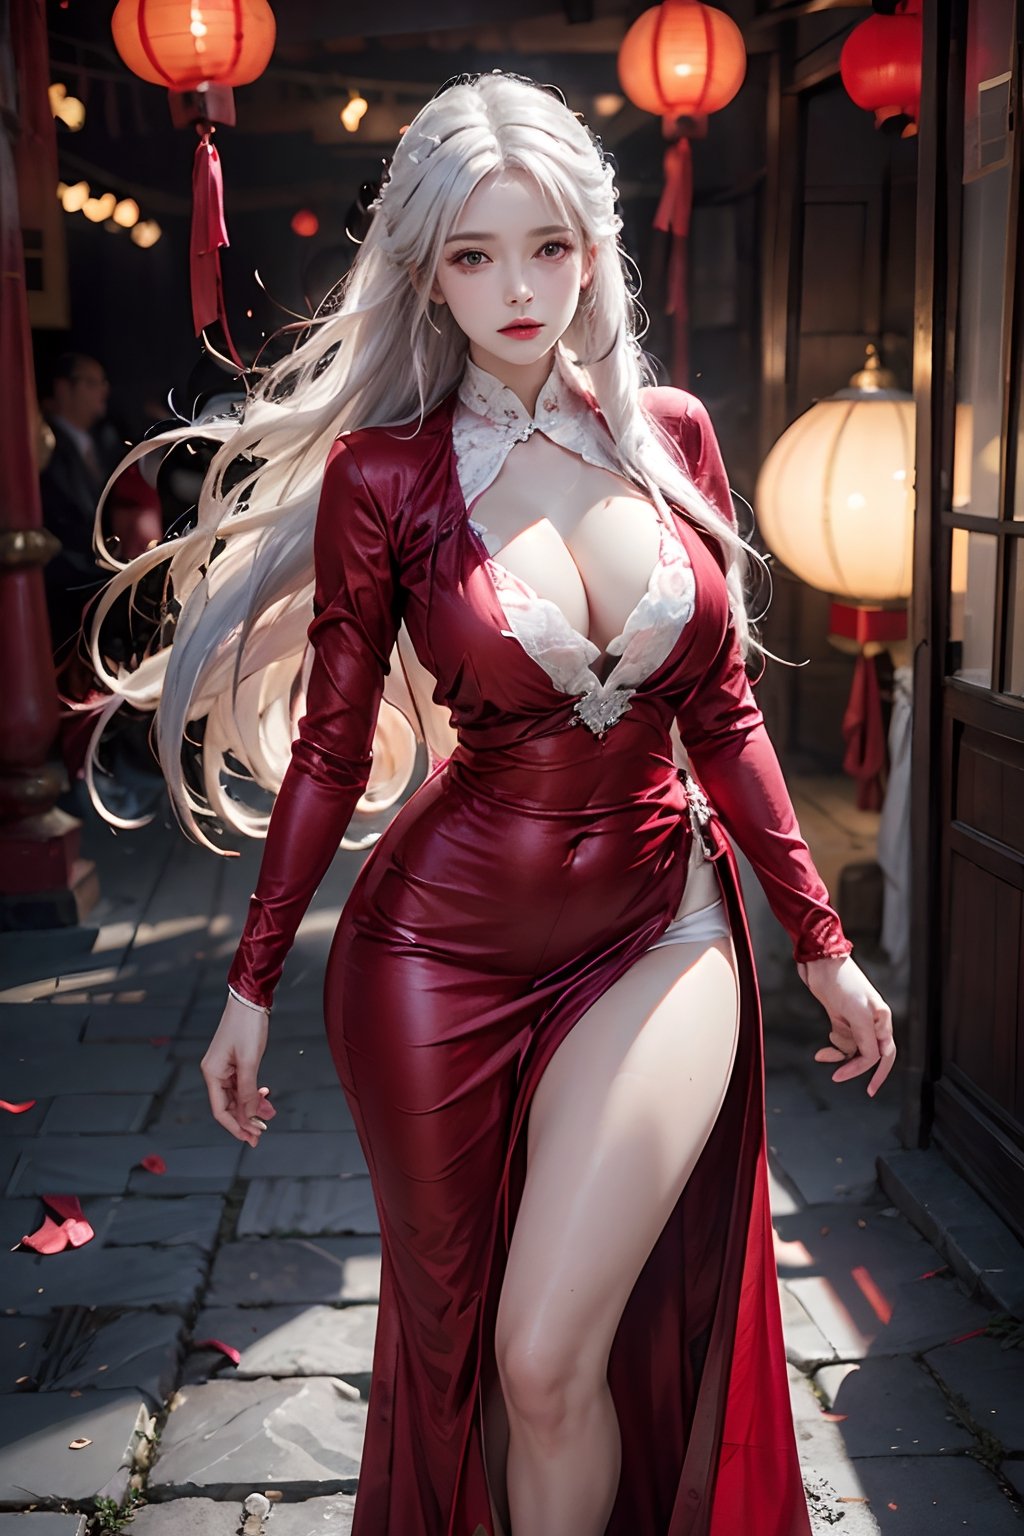 photorealistic, high resolution, 1girl, hips up, jewelry, tattoo, pink lip, long white hair,The picture is frozen in a solemn and solemn memorial scene. The ancient courtyard was surrounded by red lanterns, and their faint light illuminated the entire scene.A woman wearing a red dress. Her long hair was as white, hanging down to her waist. A red ribbon fluttered gently in the breeze